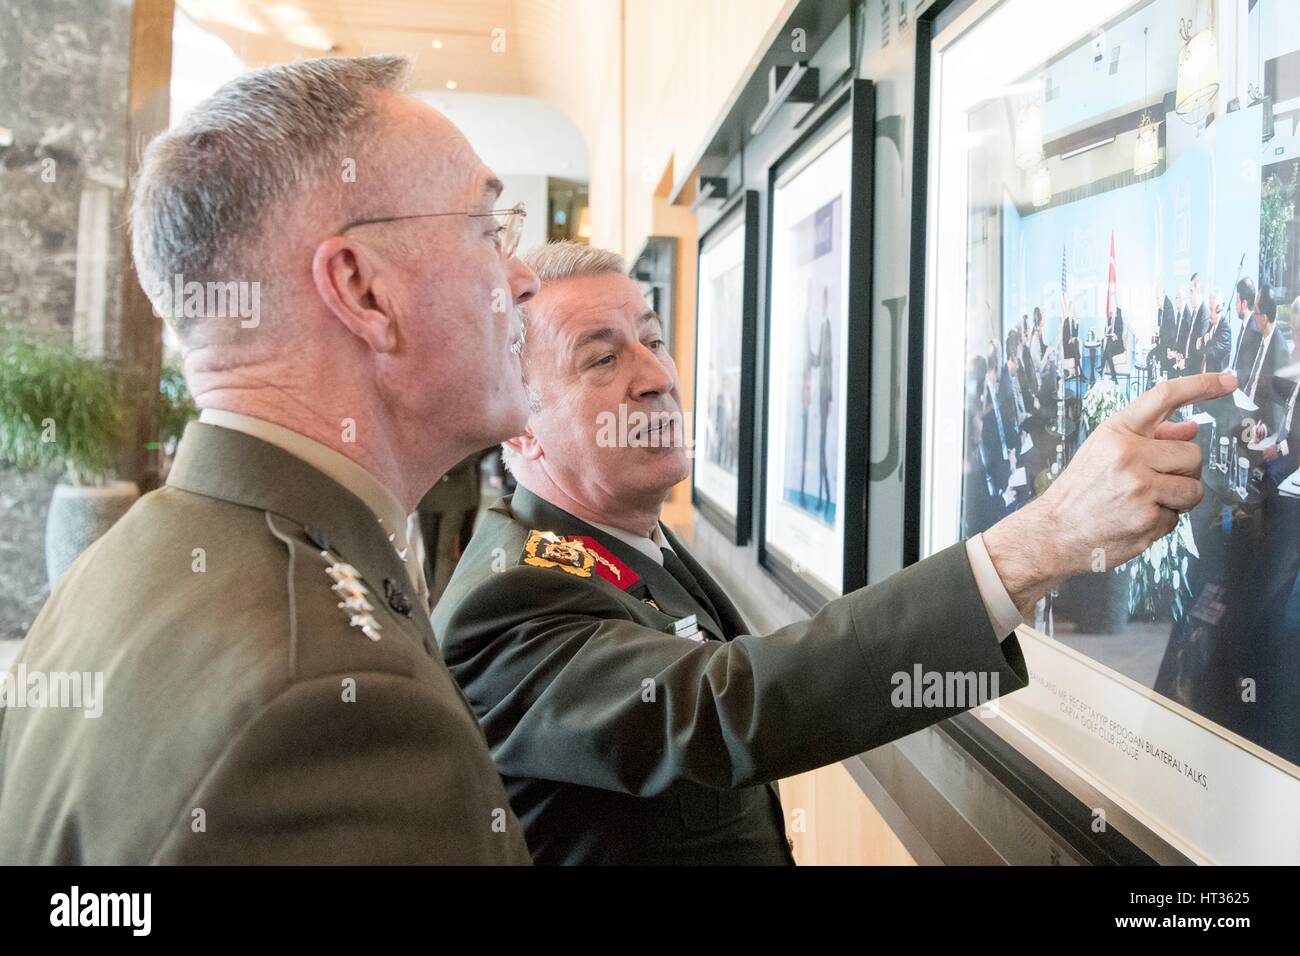 Antalya, Turkey. 7th Mar, 2017. U.S. Joint Chiefs Chairman Gen. Joseph Dunford, left, is show a photo by Turkish Gen. Hulusi Akar prior to meetings with Russian Gen. Valery Gerasimov March 7, 2017 in Antalya, Turkey. The three chiefs of defense are meeting to discuss operations in Syria. Credit: Planetpix/Alamy Live News Stock Photo